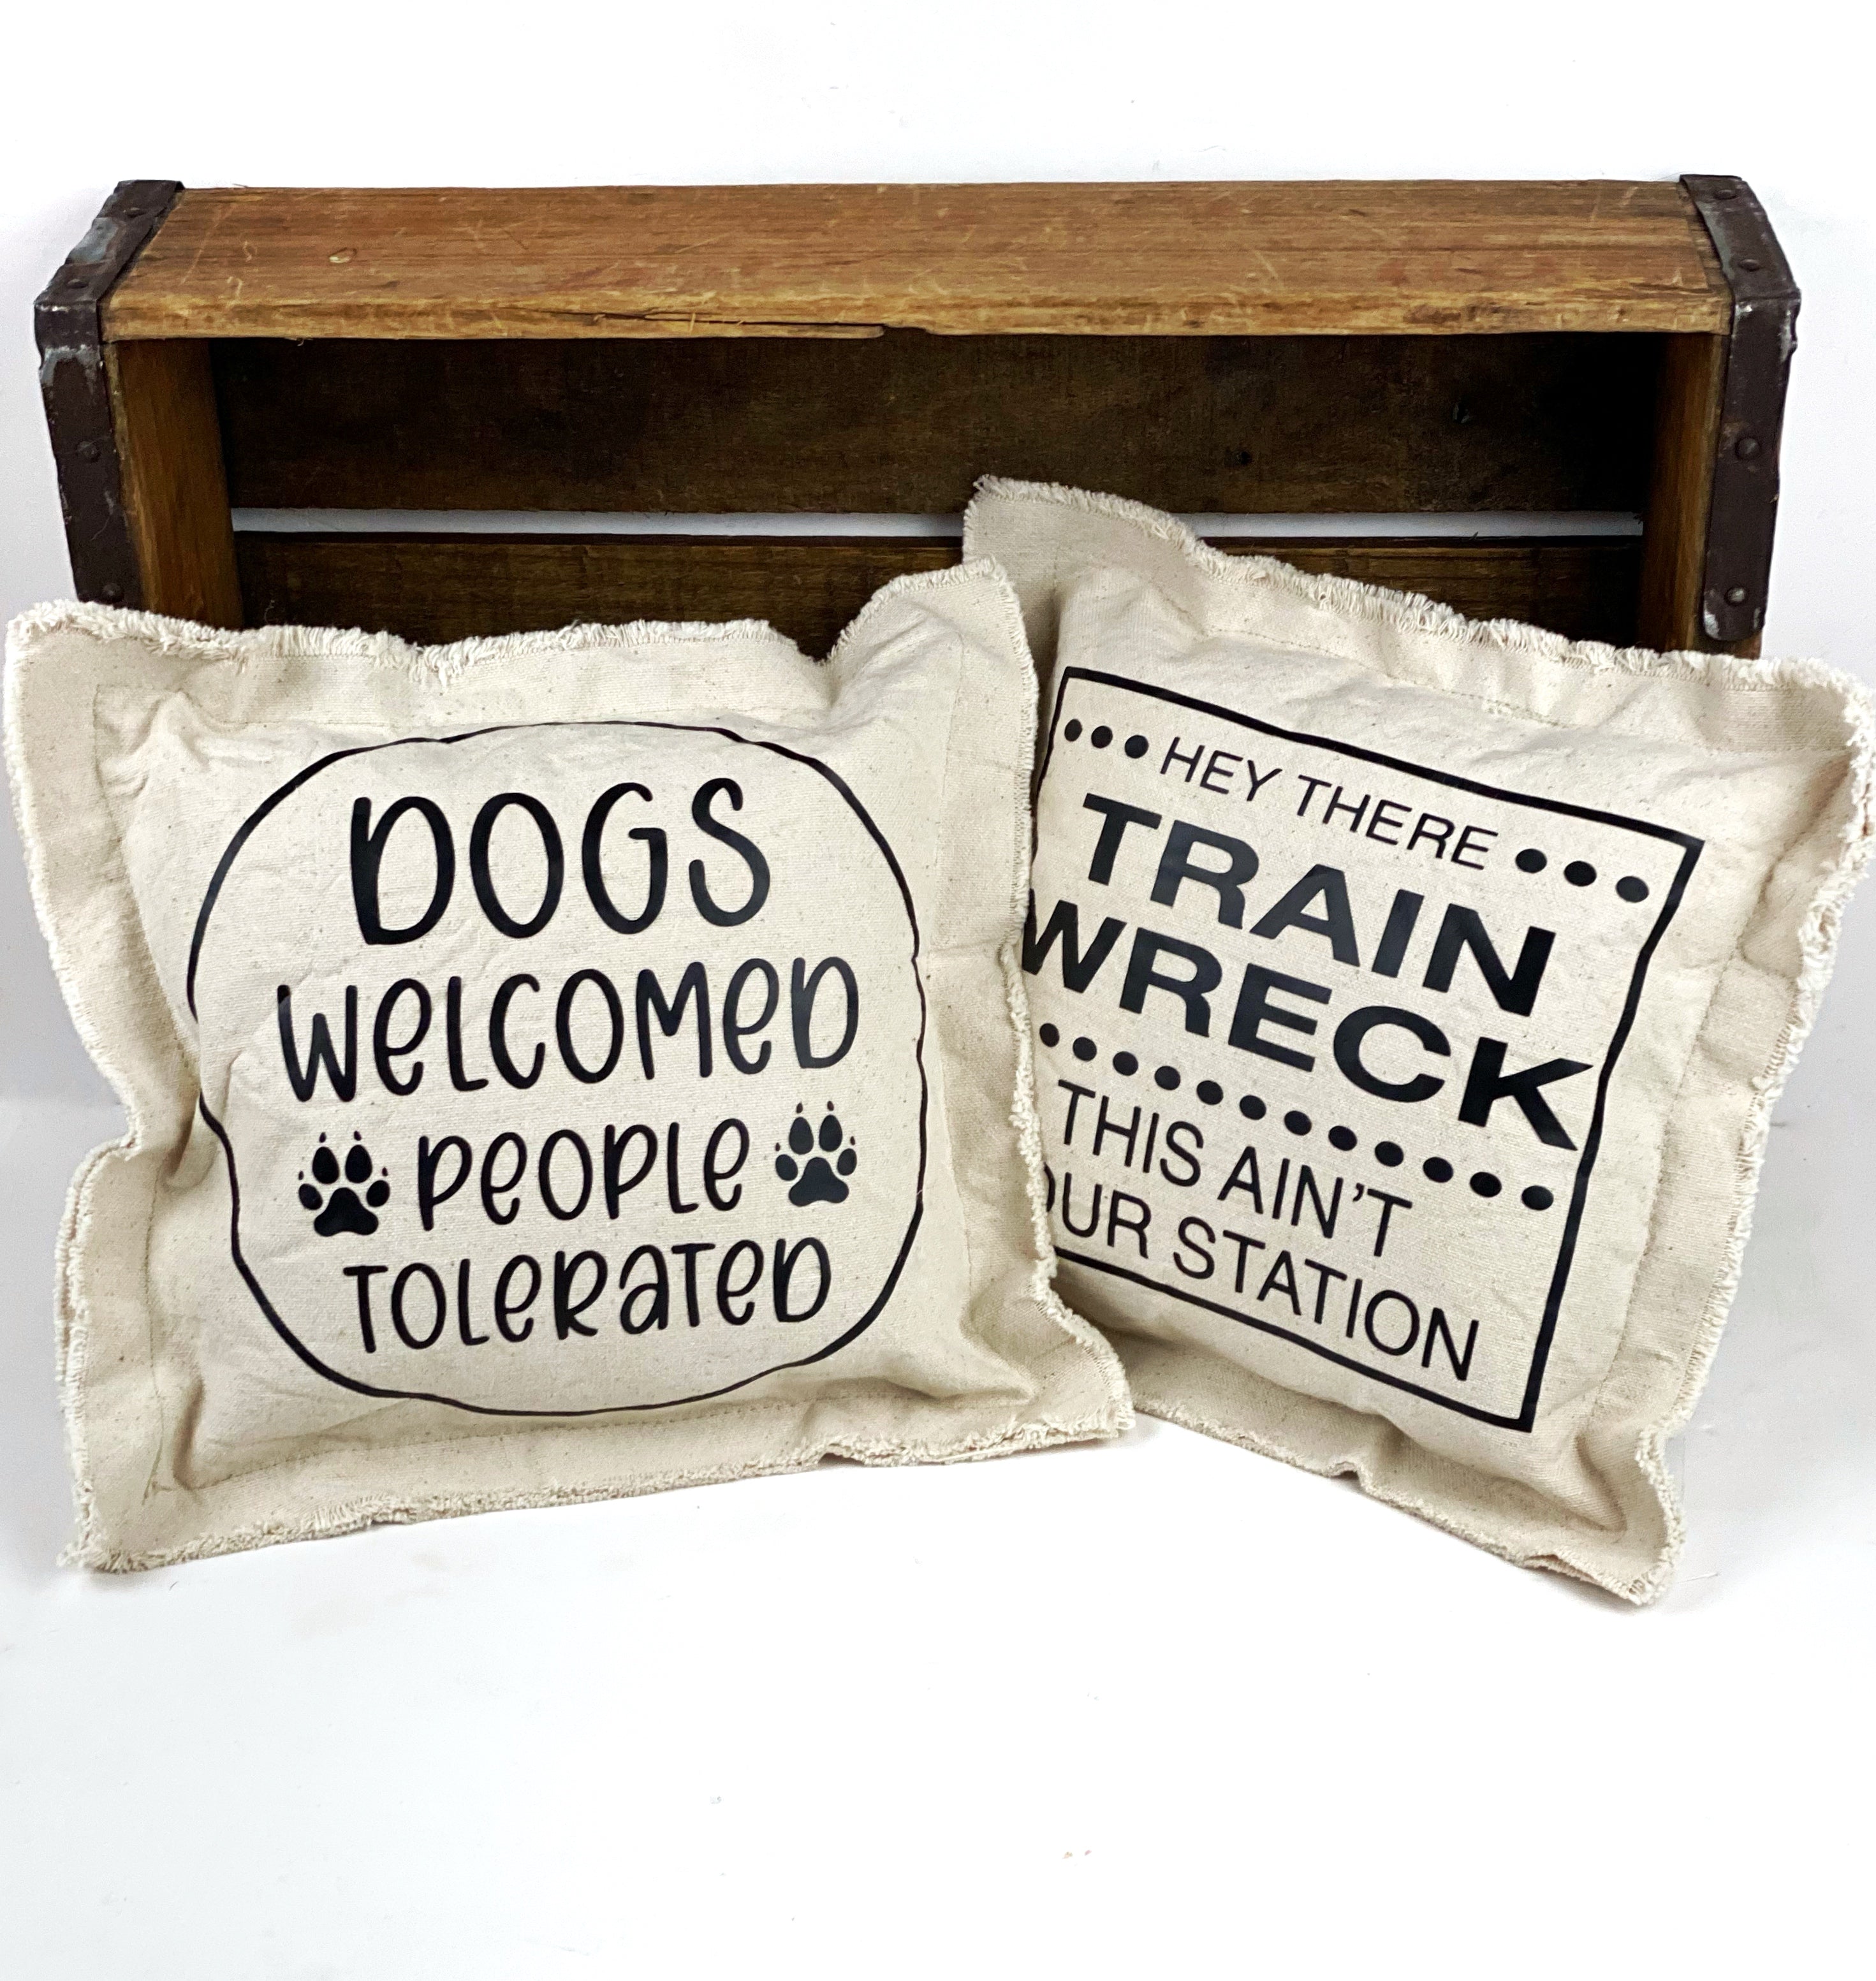 Dog or Train Wreck Natural Duck Canvas Pillow Funny Saying Novelty Decorative Home Decor Pillow